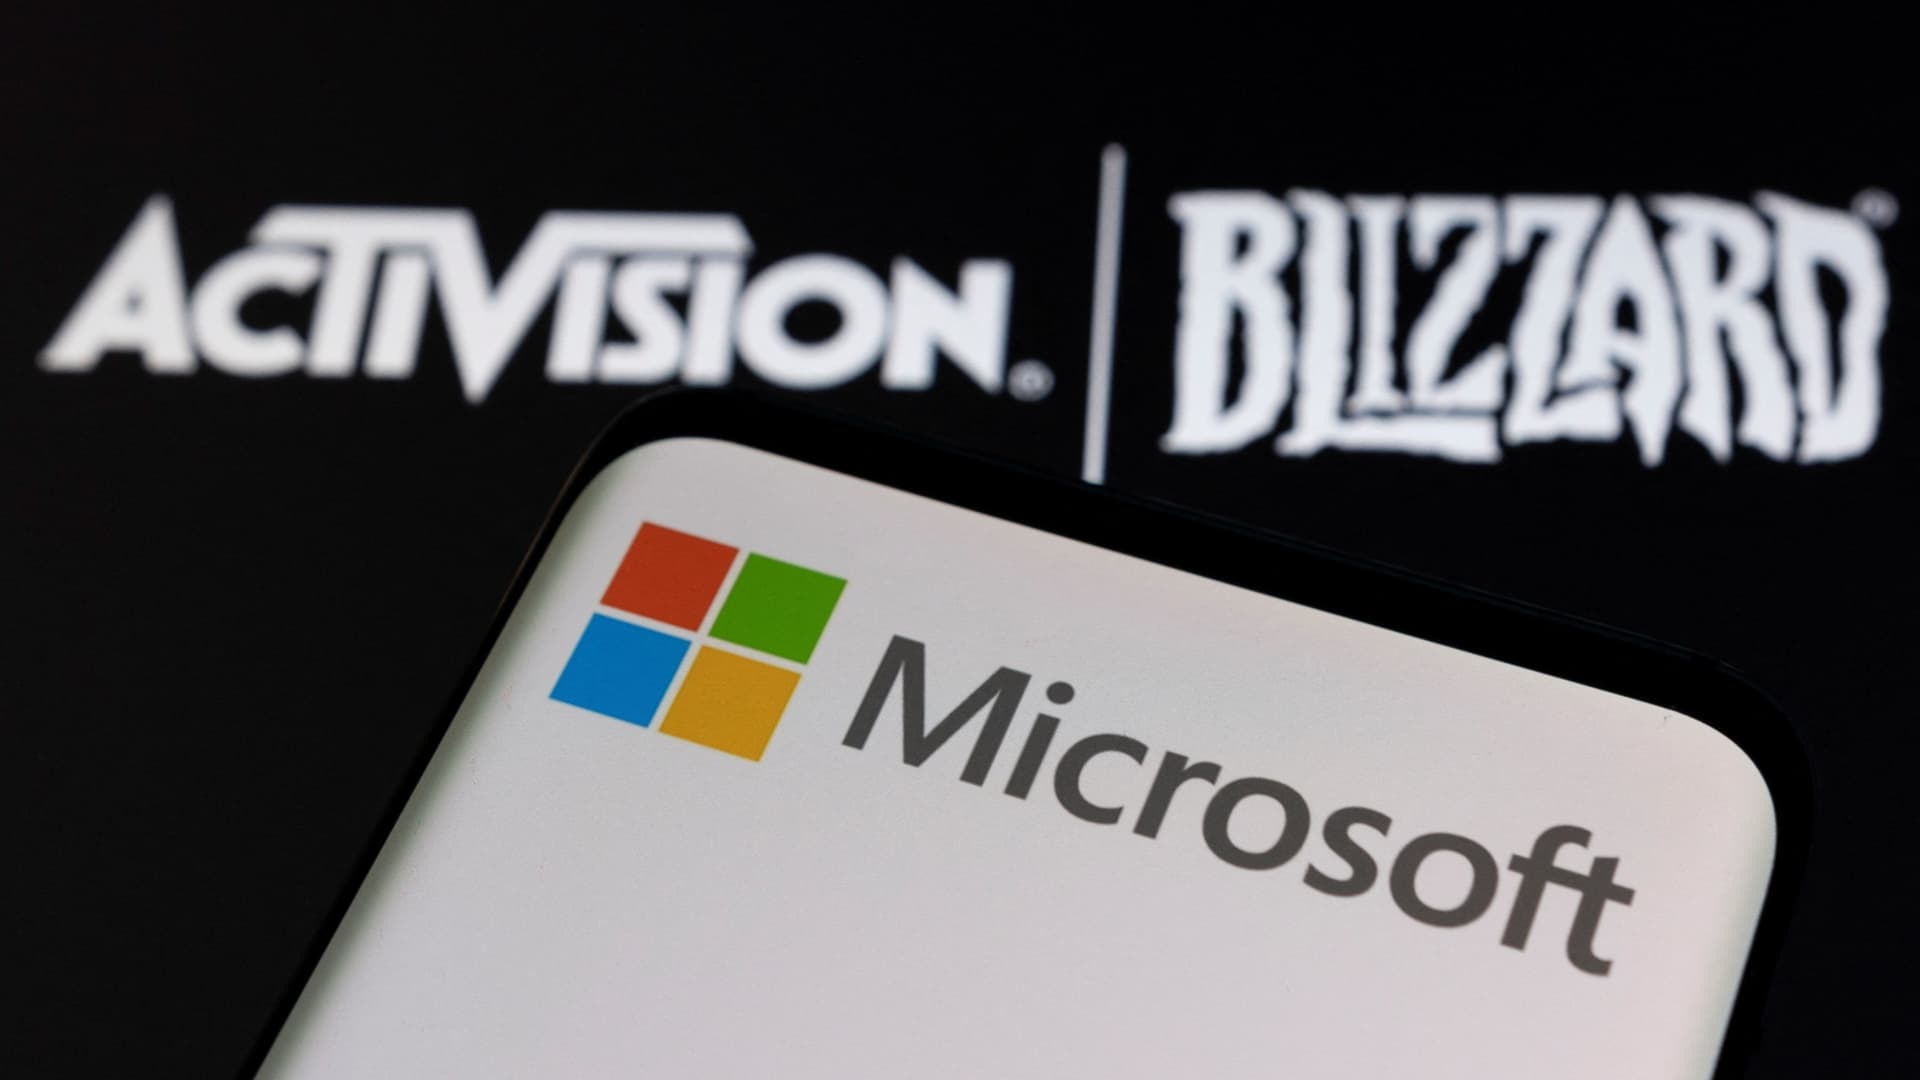 Microsoft-Activision Blizzard takeover approved by UK regulator CMA